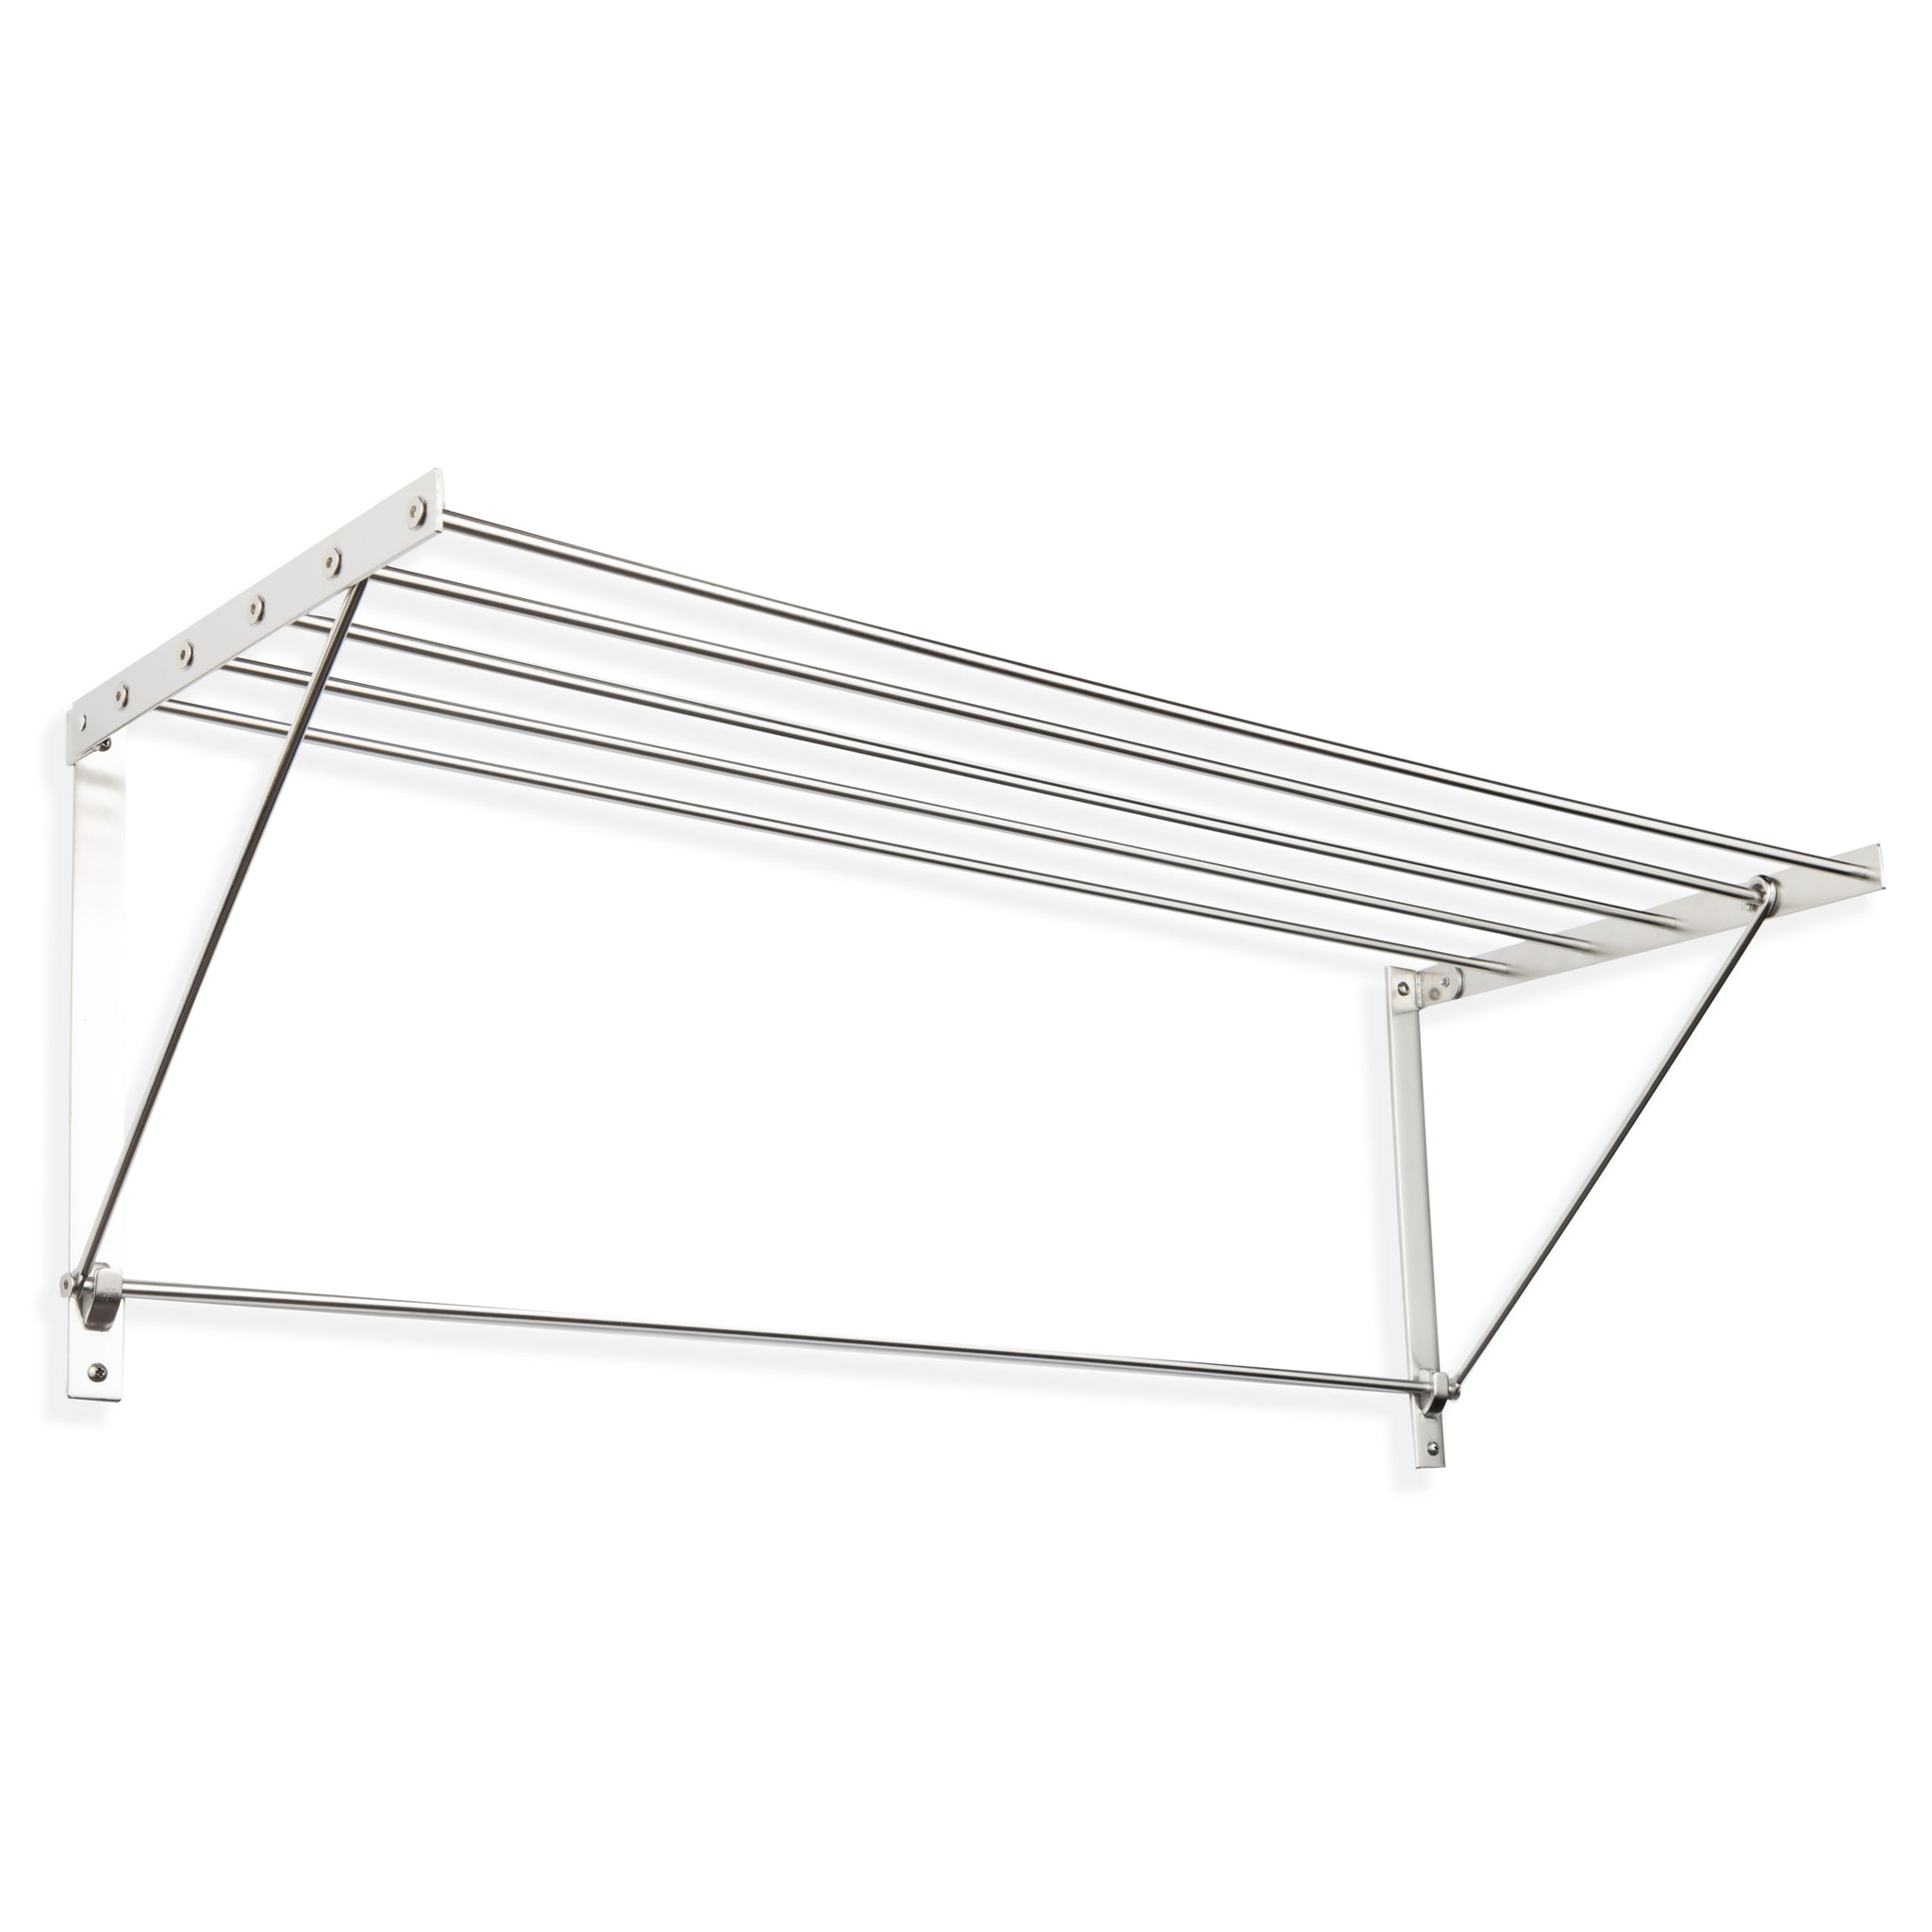 Smartsome Fold Away Clothes Rack: Stainless Steel Wall Mounted Laundry  Drying Rack - 8 Rods, 22 Feet Capacity- Easy to Install Space Saver Design  - 60